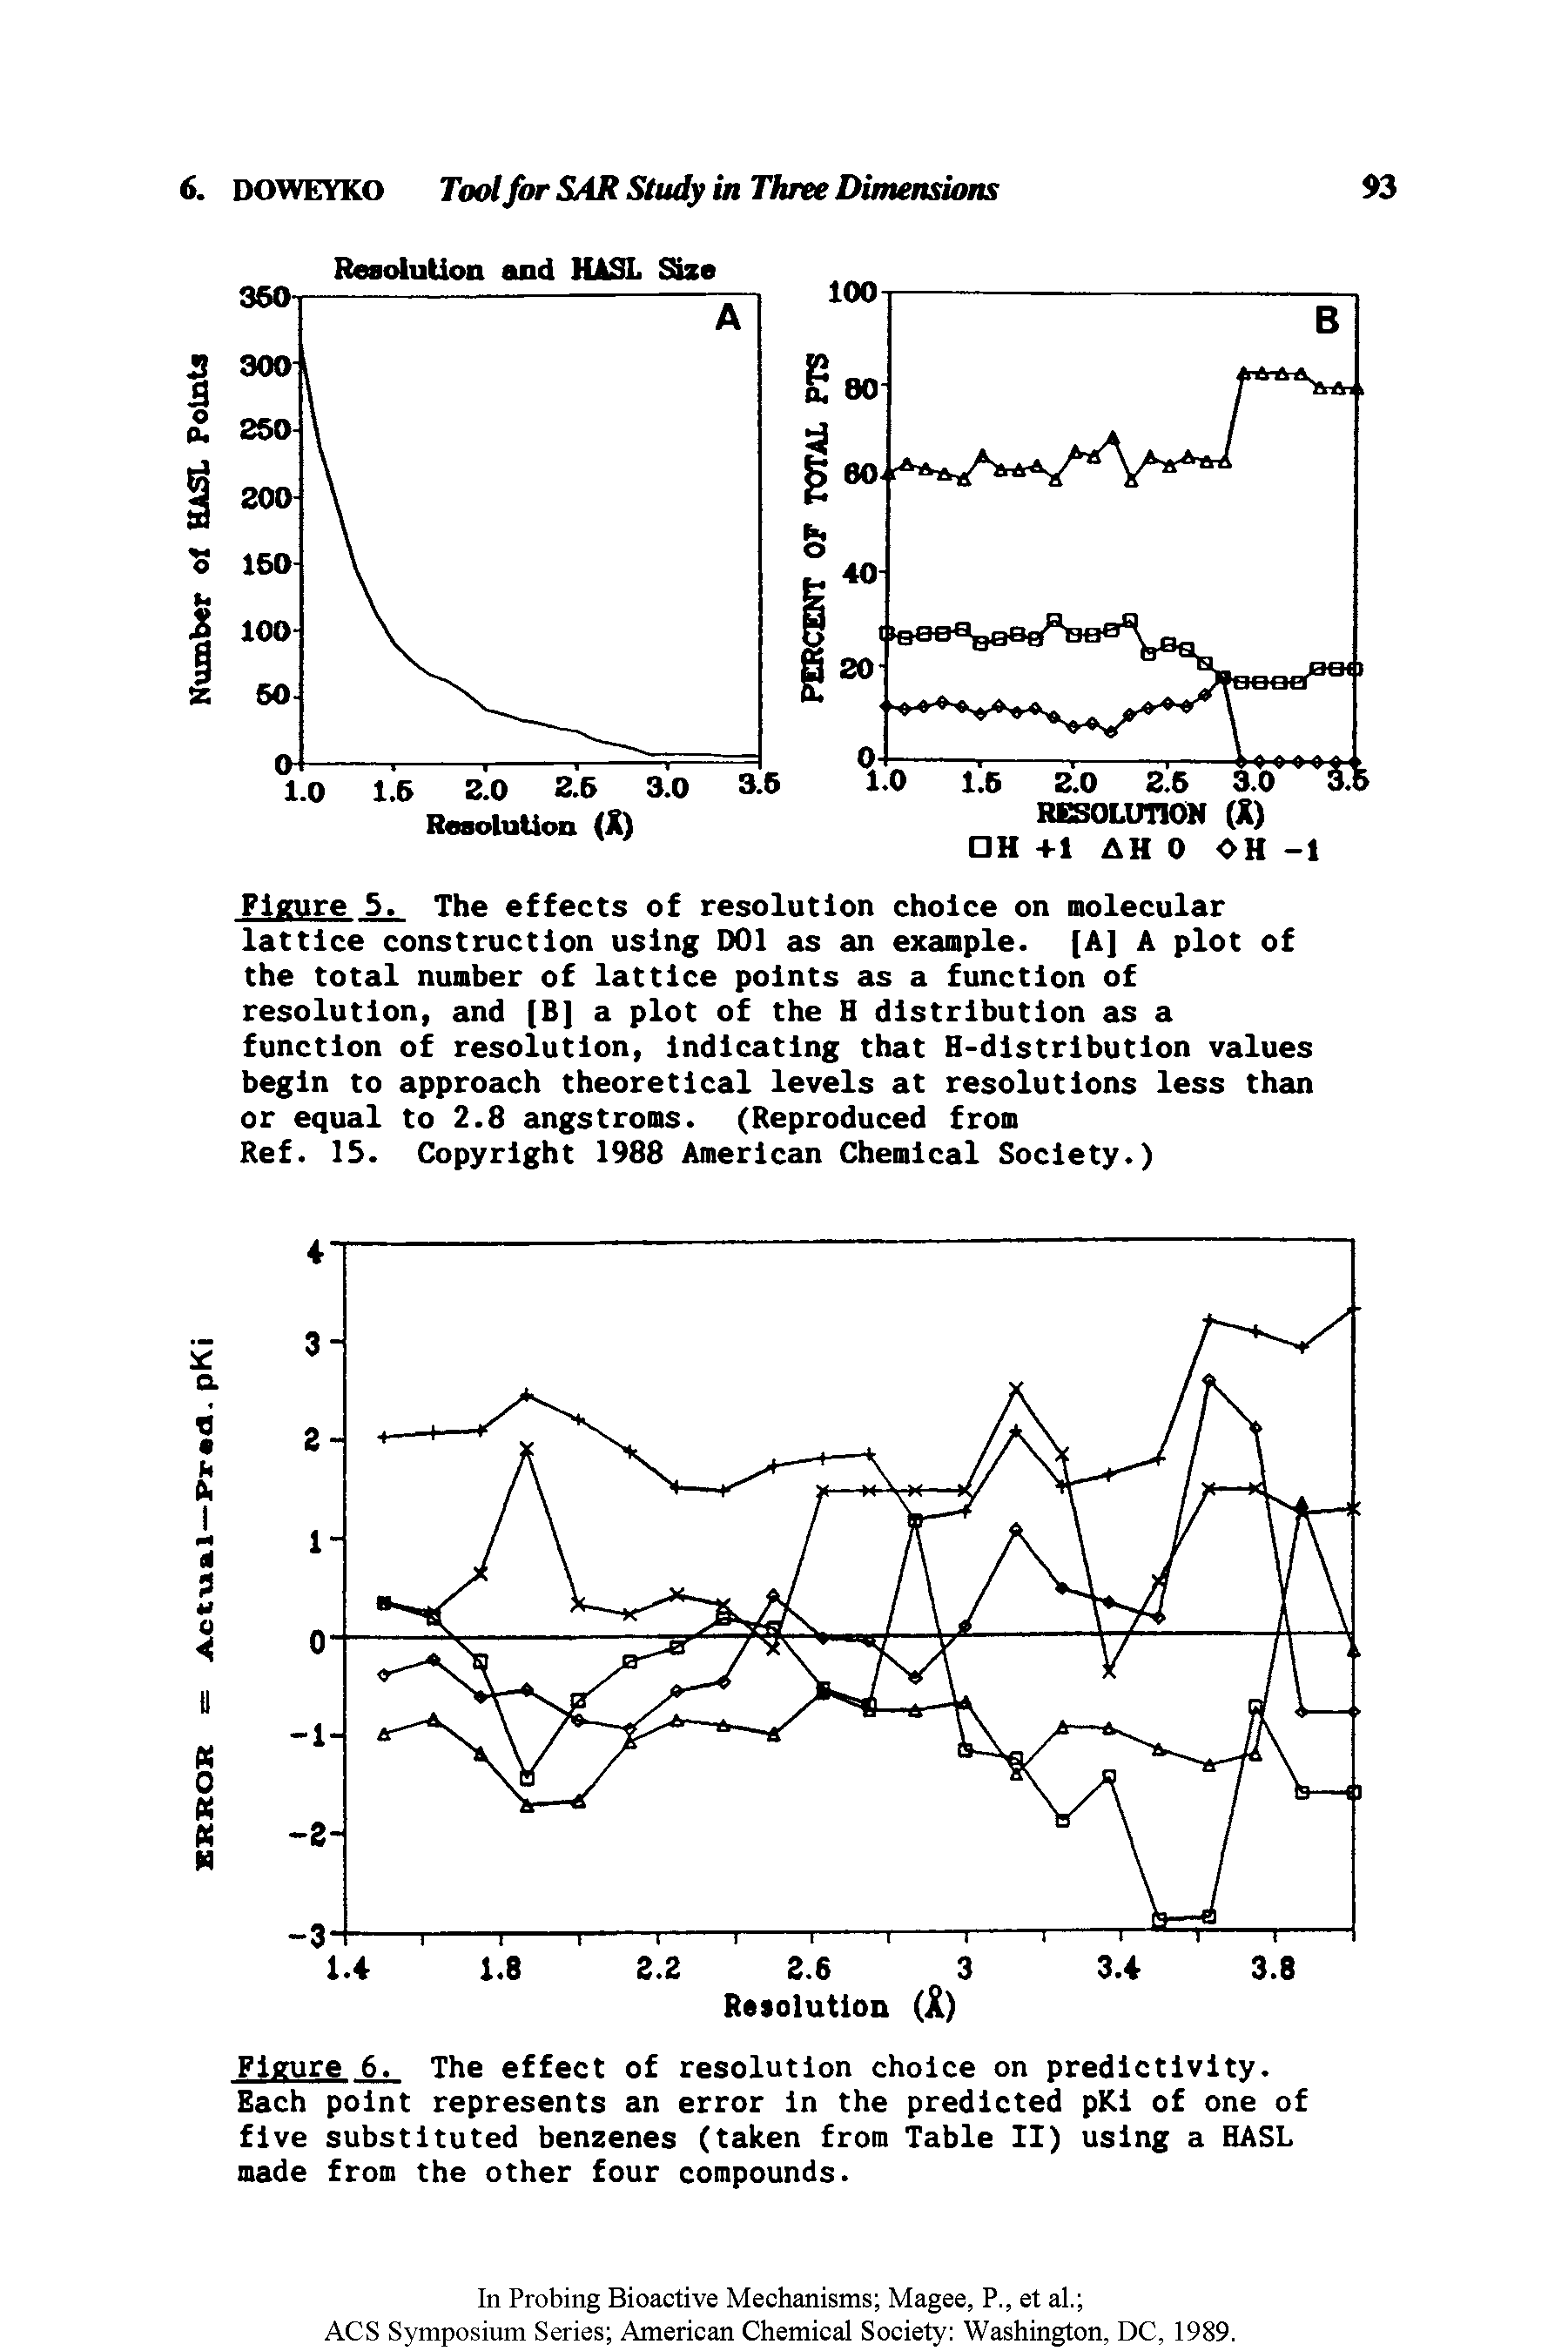 Figure 6. The effect of resolution choice on predictivity. Each point represents an error in the predicted pKi of one of five substituted benzenes (taken from Table II) using a HASL made from the other four compounds.